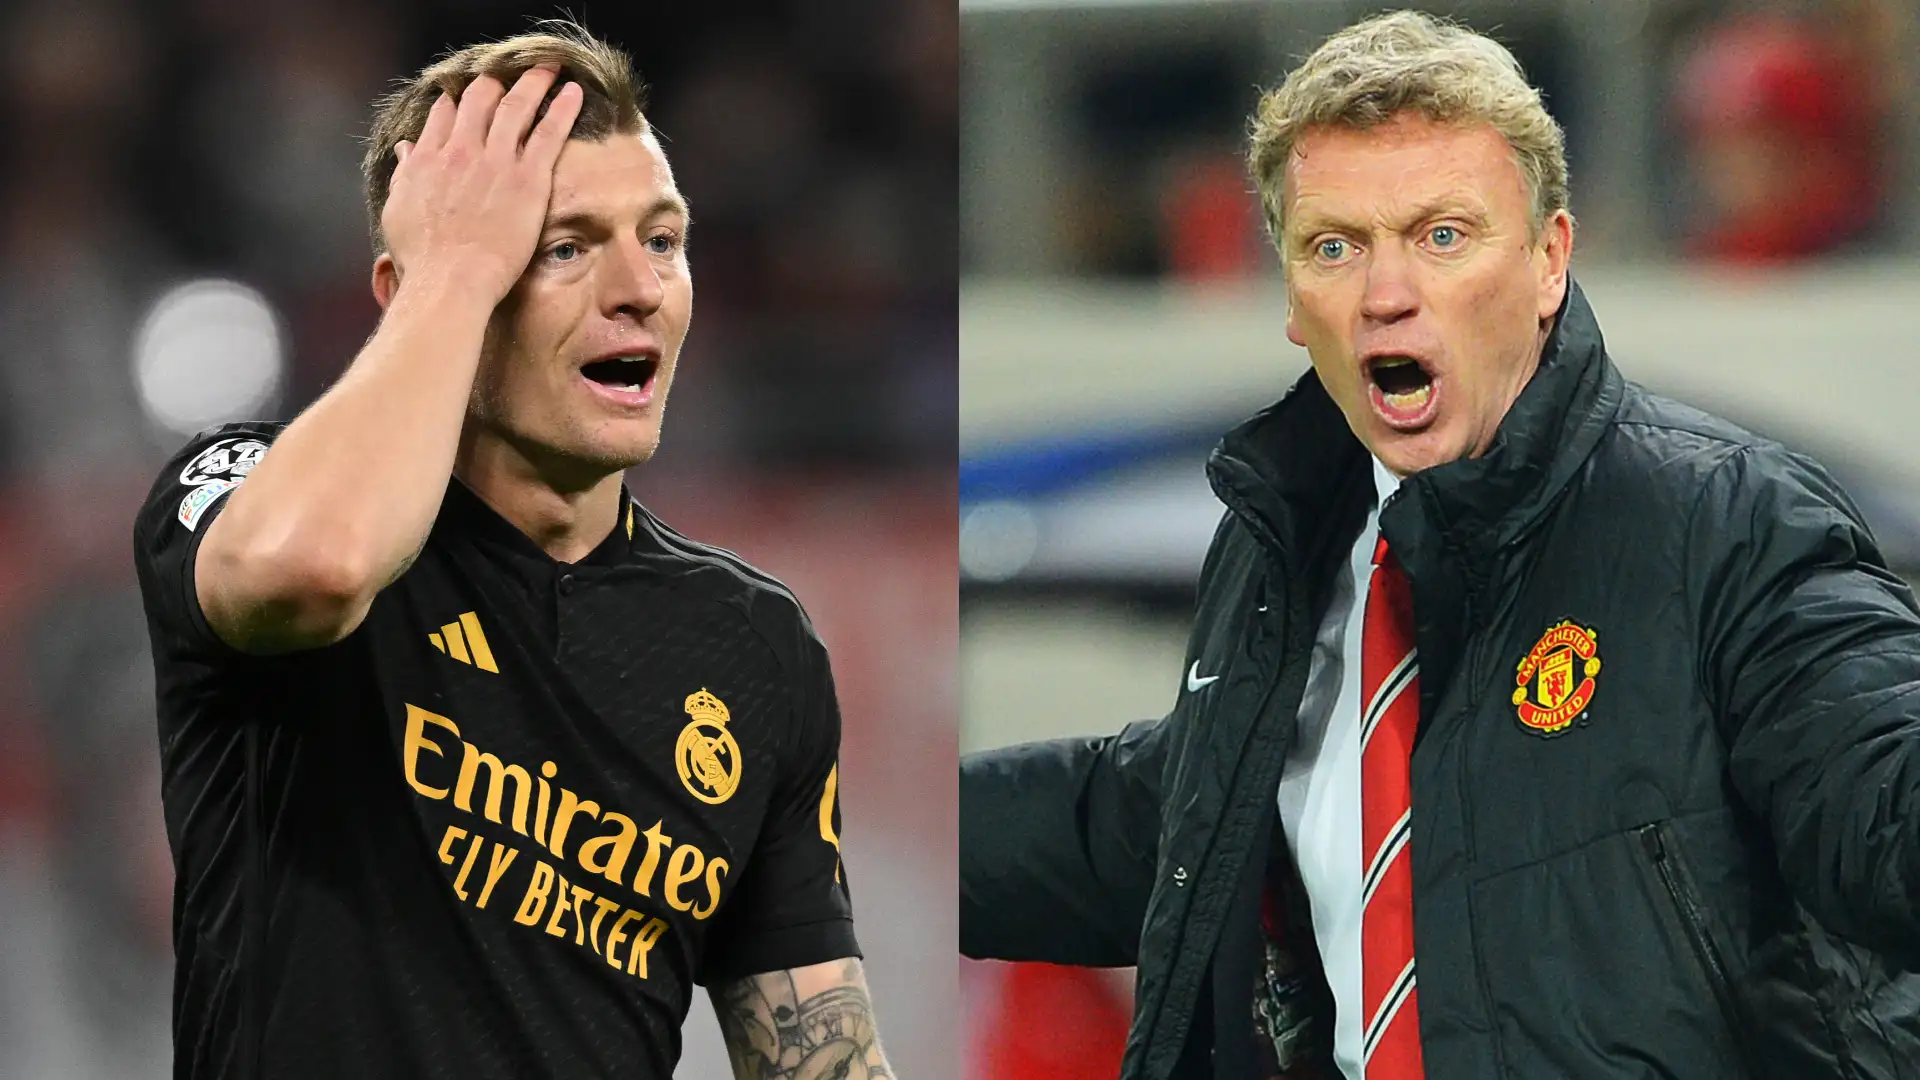 Revealed: How Toni Kroos’ Man Utd move collapsed due to David Moyes’ sacking despite contract being ‘basically done’ as Real Madrid legend announces retirement